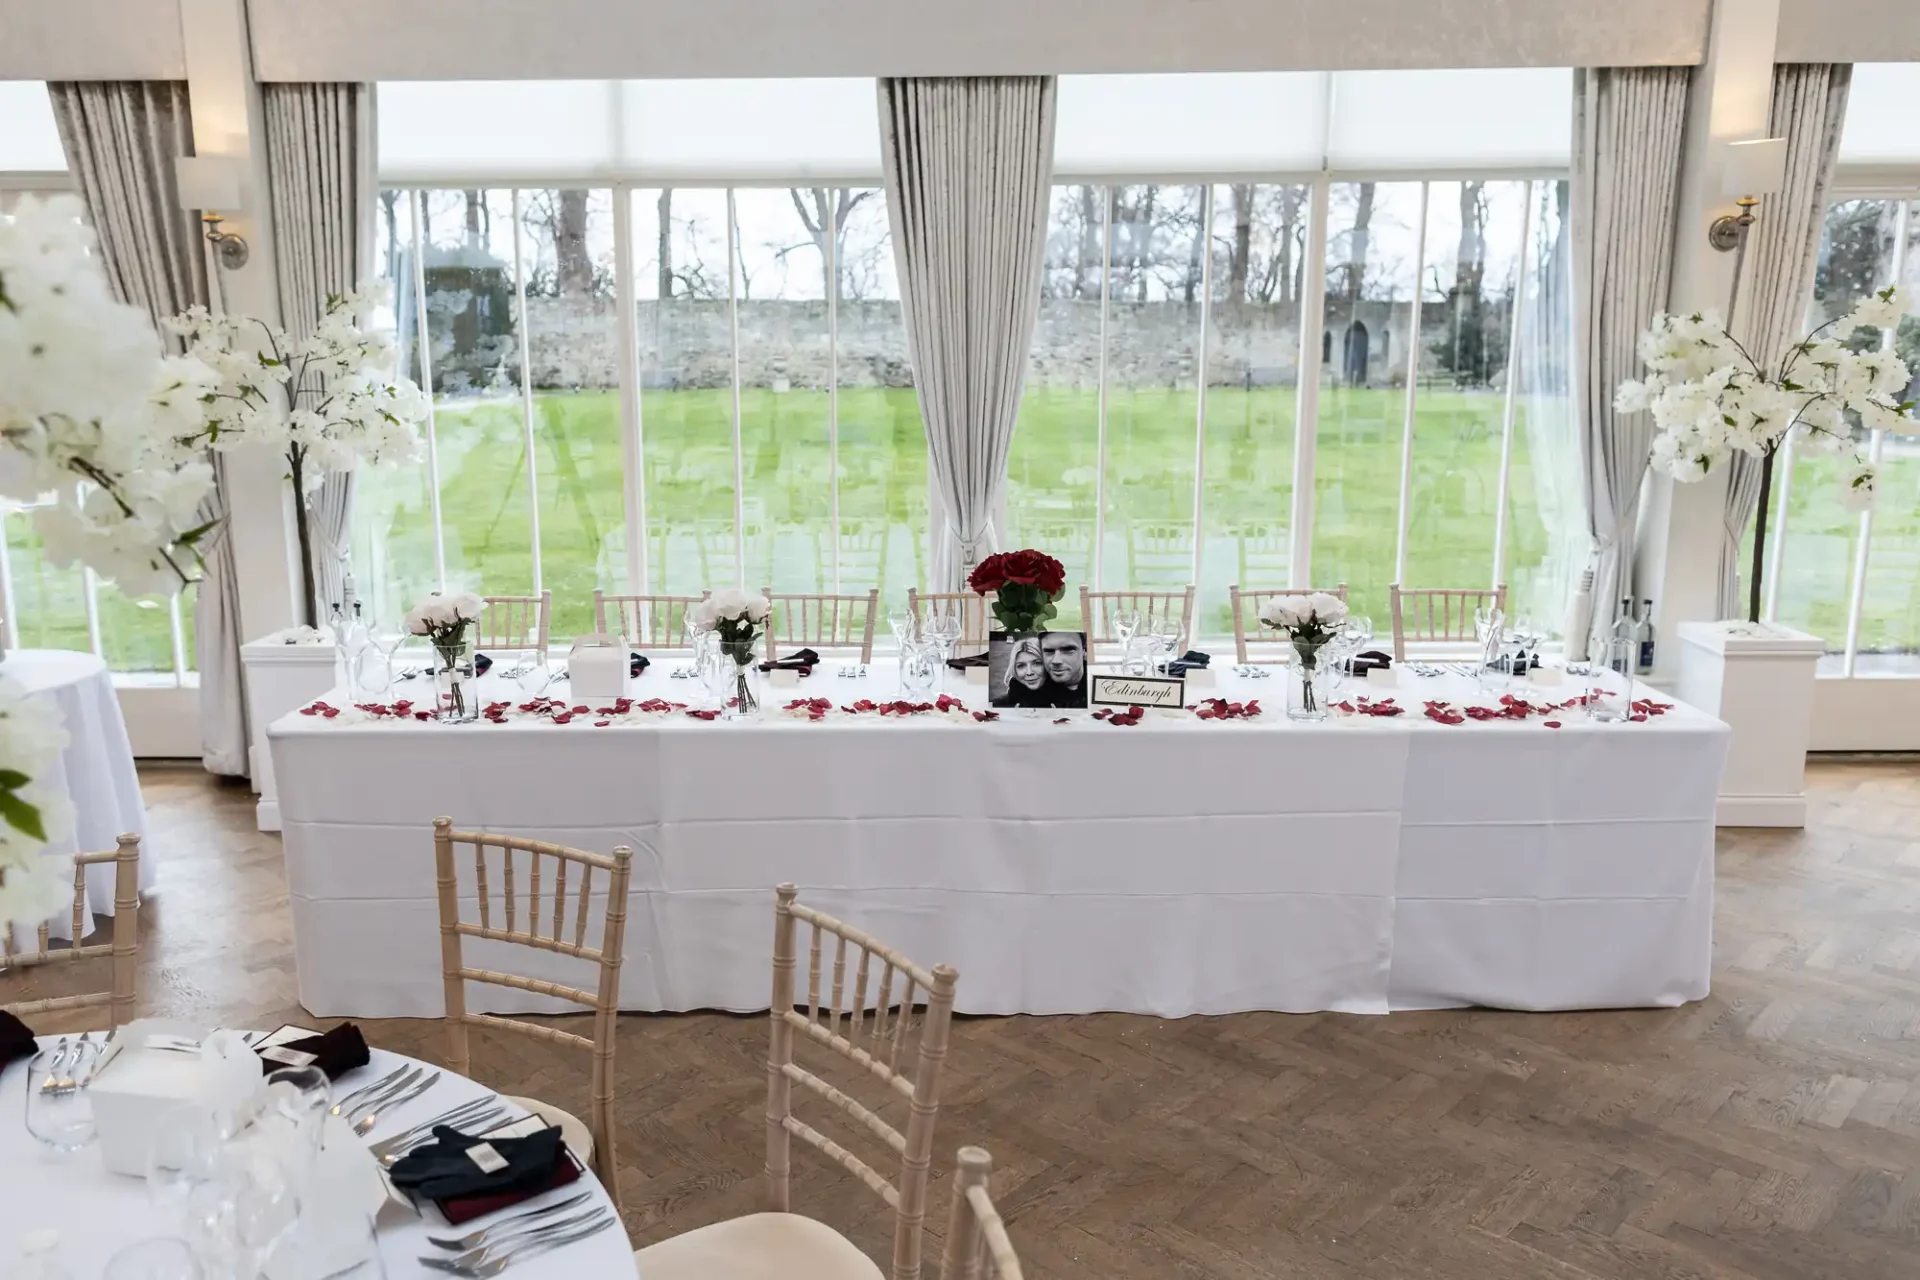 Elegant wedding reception table setting with white and red decorations, floral centerpieces, and framed photos, in a room with large windows overlooking a garden.